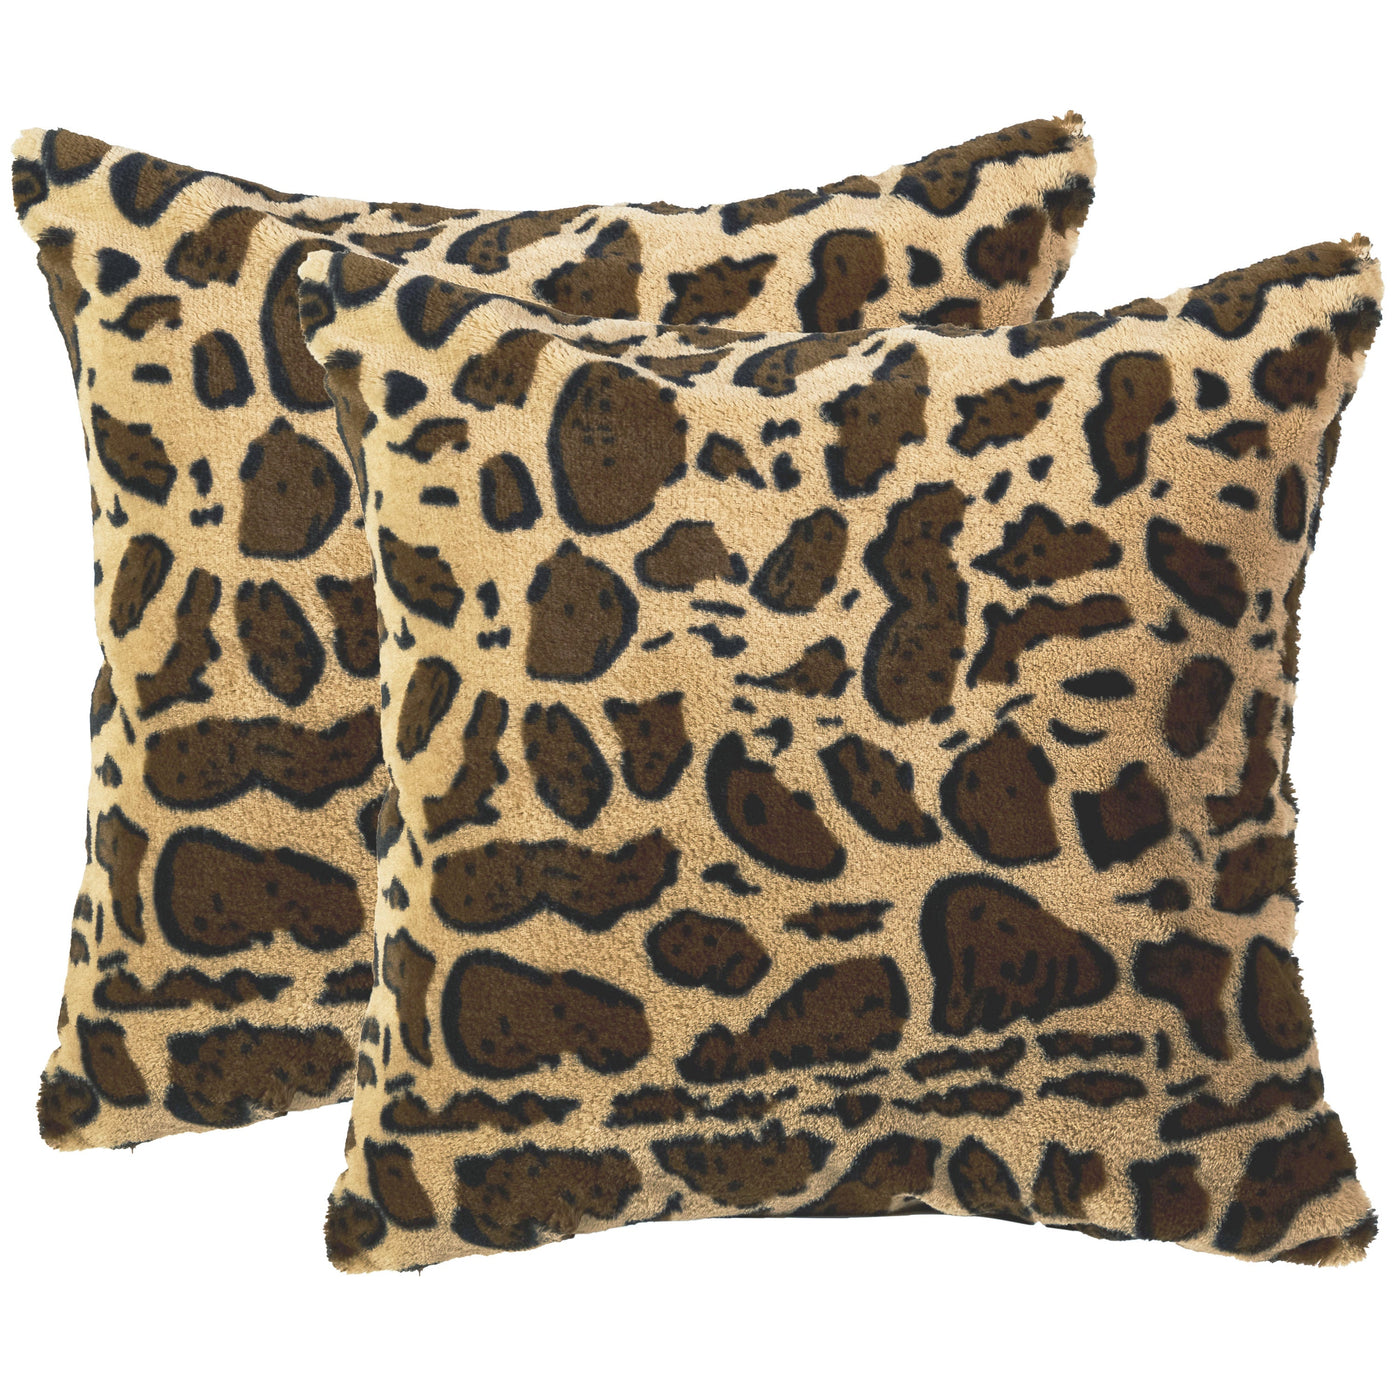 Cheer Collection Set of 2 Down and Feather Throw Pillow Insert